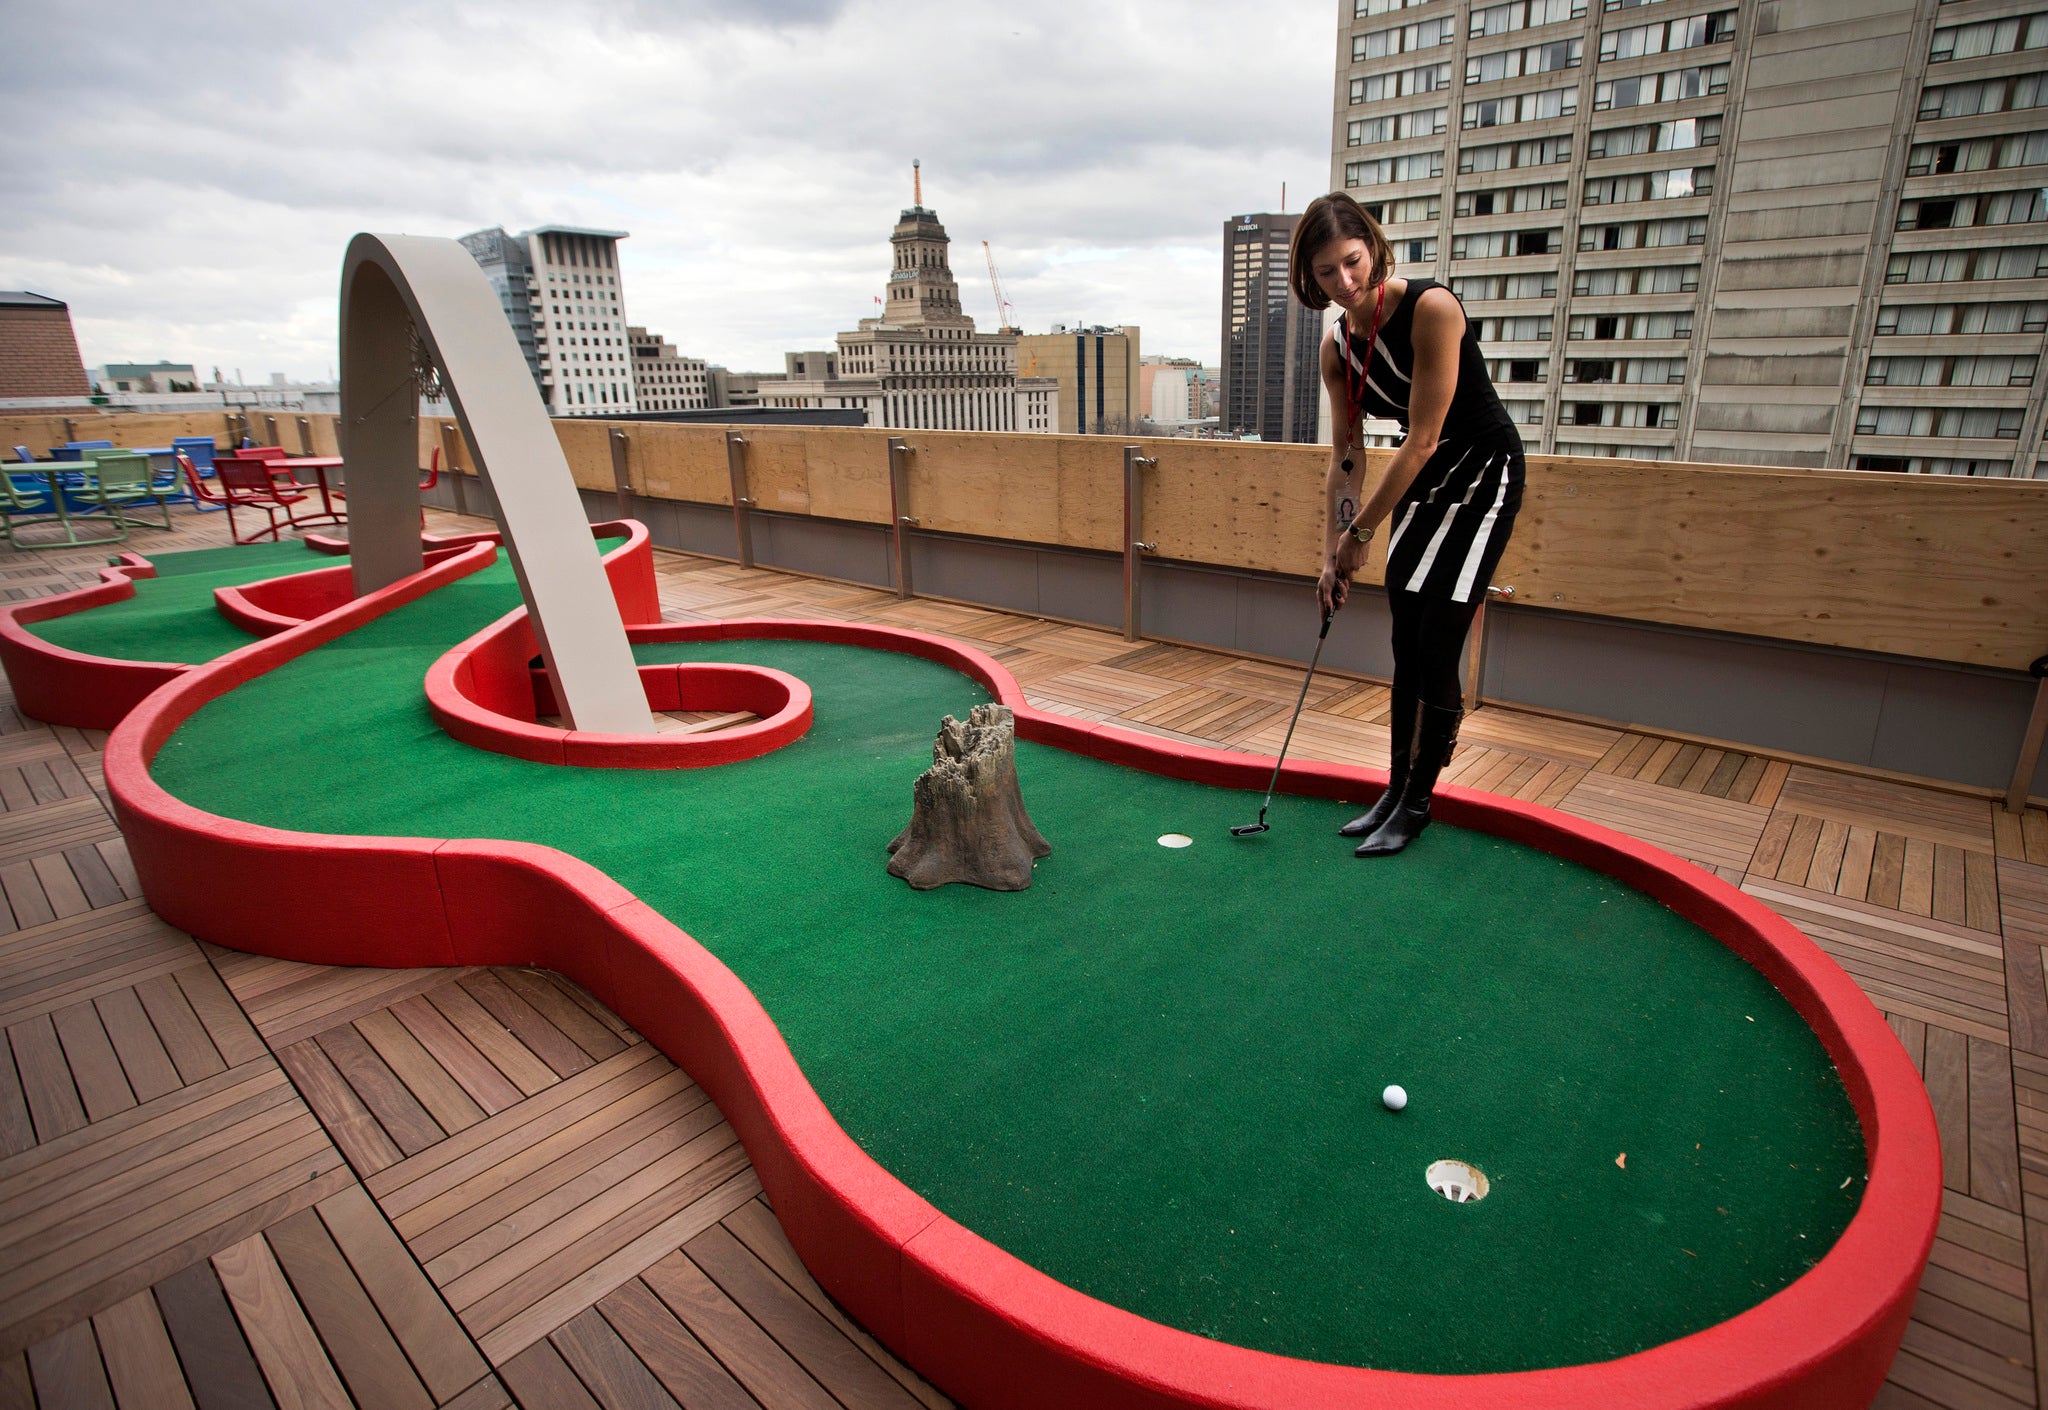 Mini golf on the roof? There are no handicaps when you work at Google